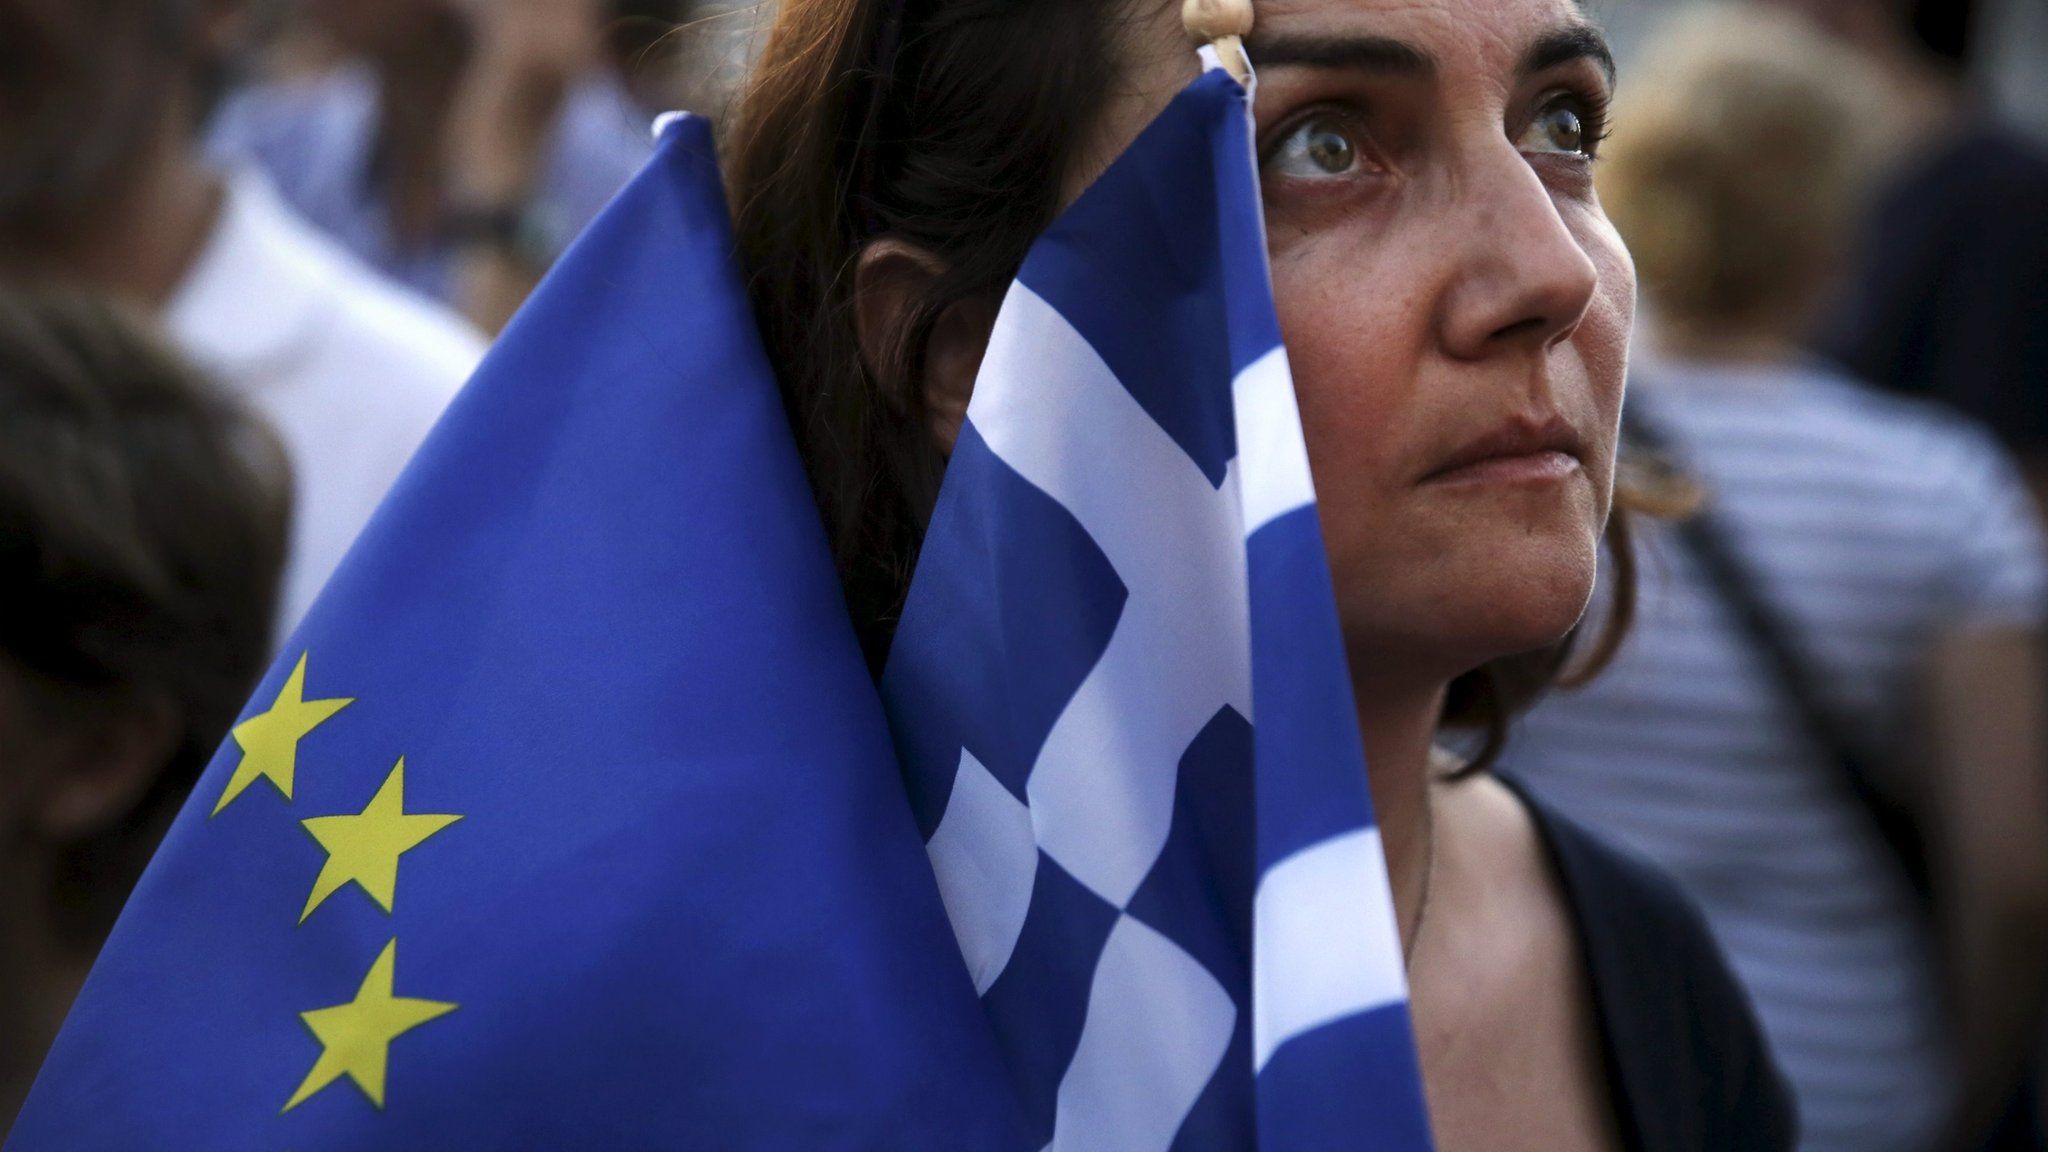 A pro-Euro protester holds a European Union and a Greek national flag during a rally in front of the parliament building in Athens, Greece, July 9, 2015